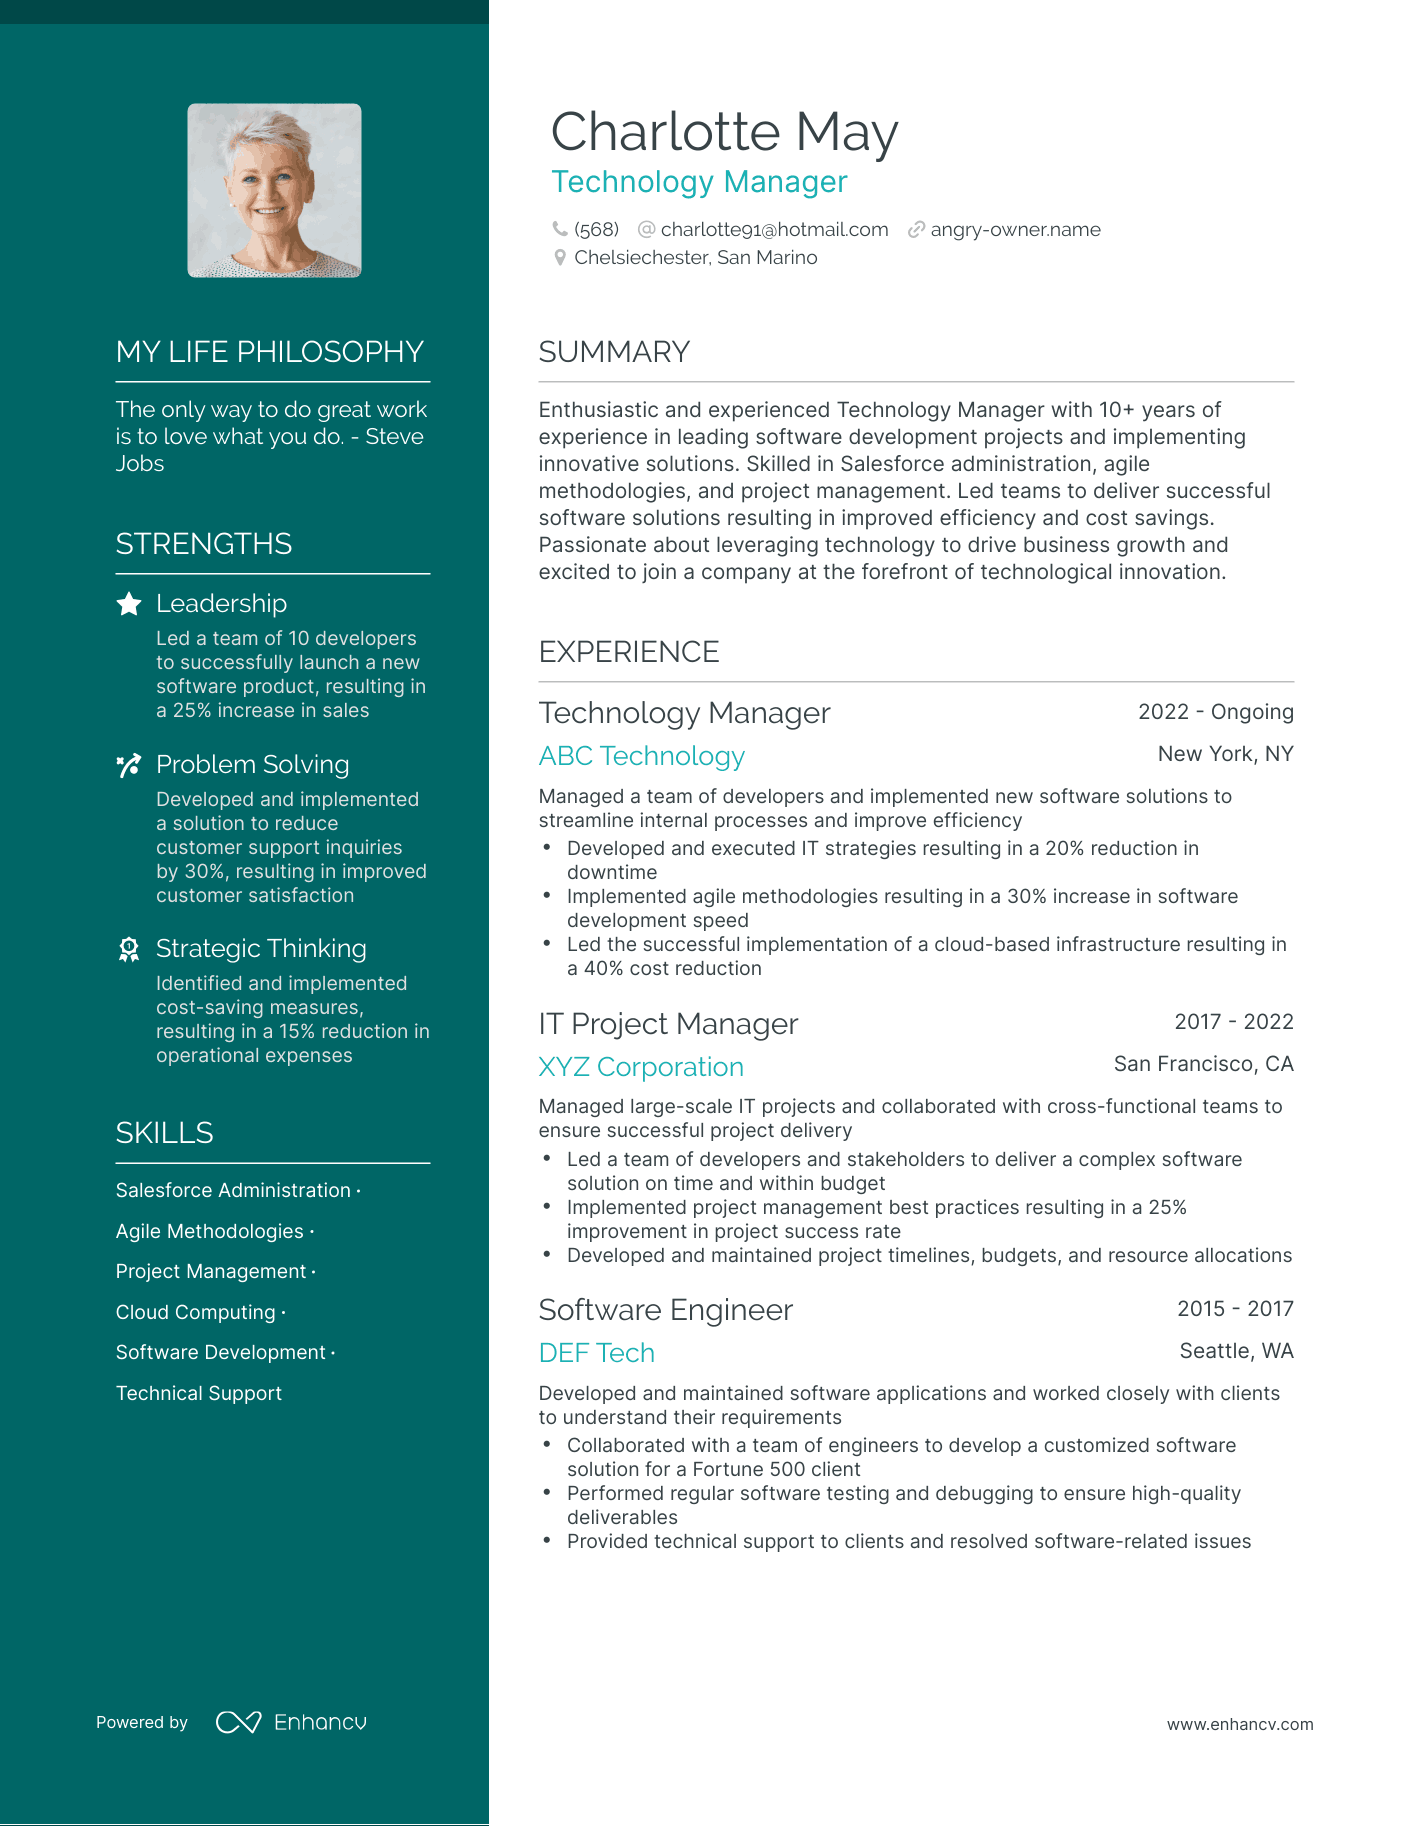 Technology Manager resume example